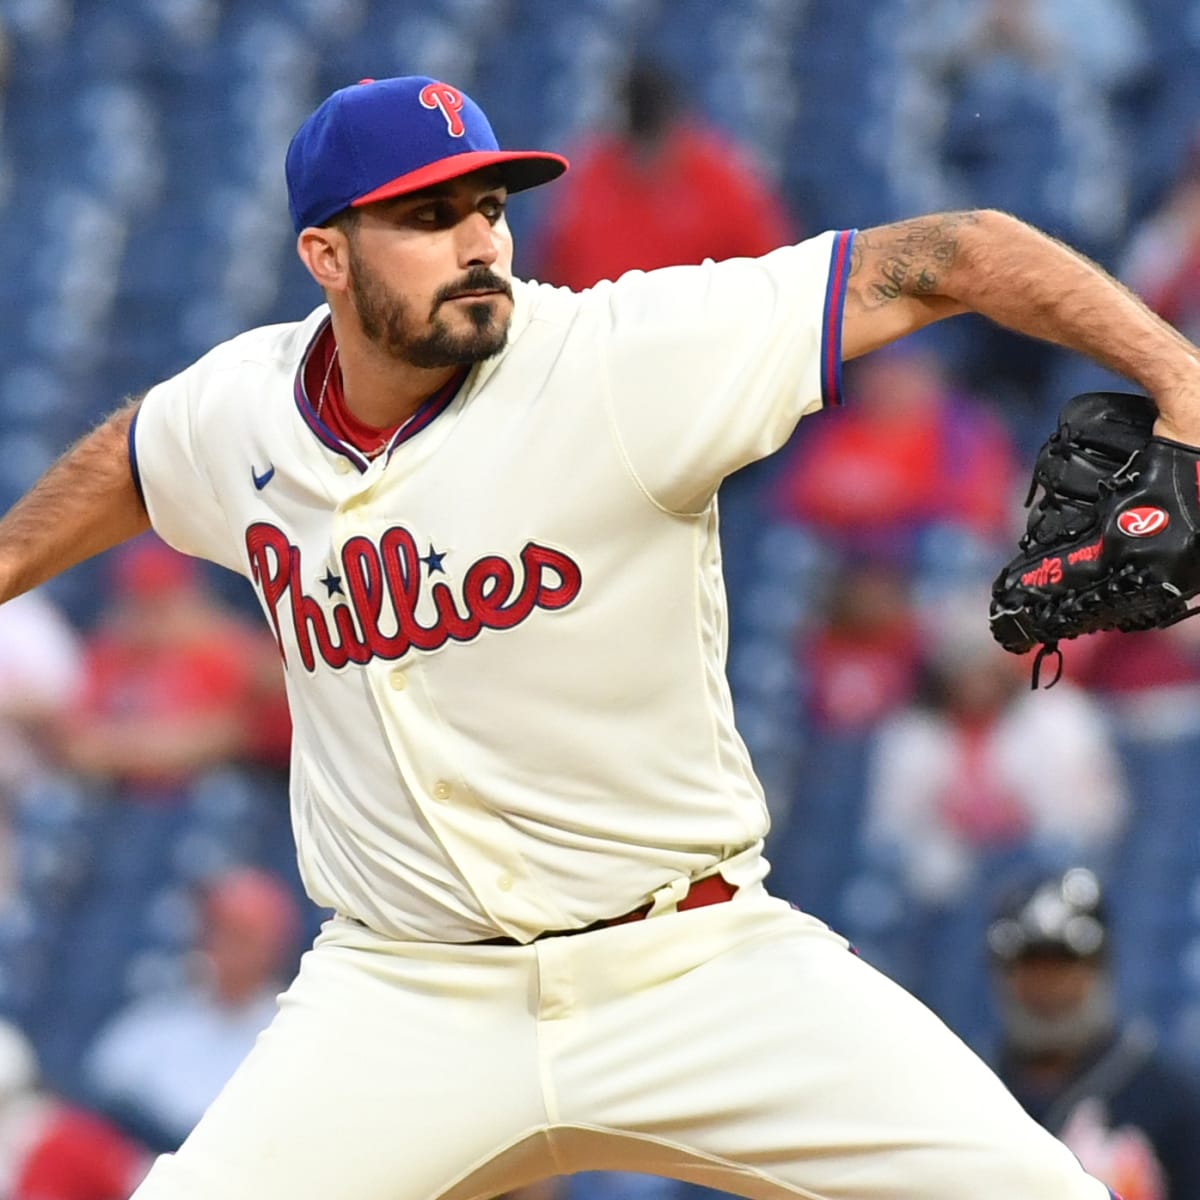 Here's why the Phillies haven't worn their polarizing red jerseys as often  lately  Phillies Nation - Your source for Philadelphia Phillies news,  opinion, history, rumors, events, and other fun stuff.